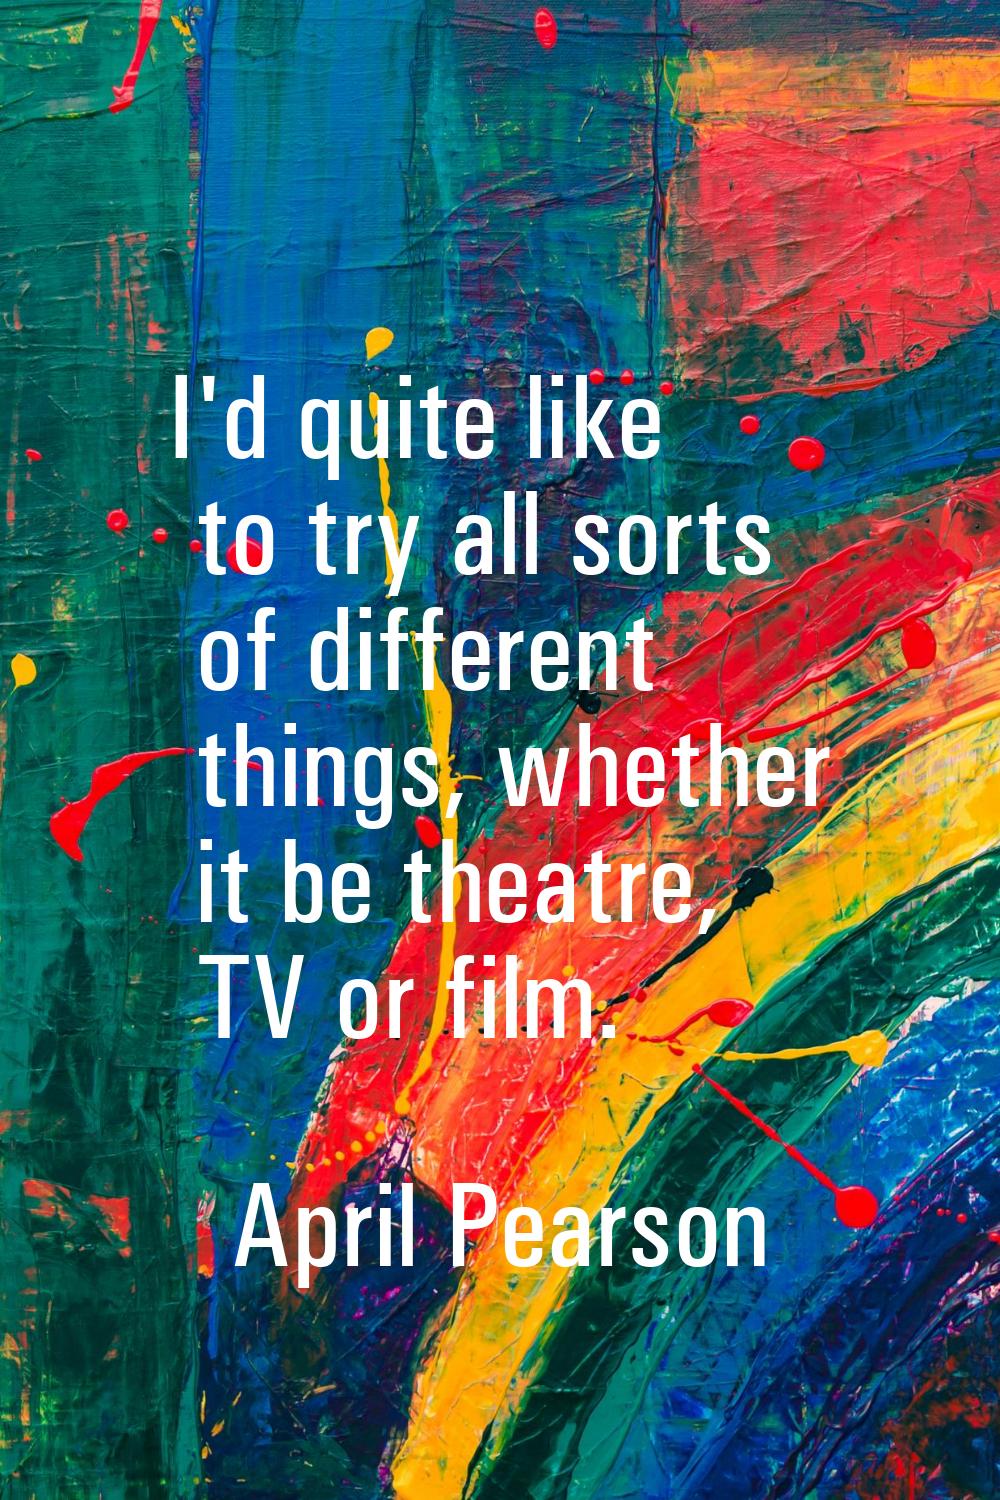 I'd quite like to try all sorts of different things, whether it be theatre, TV or film.